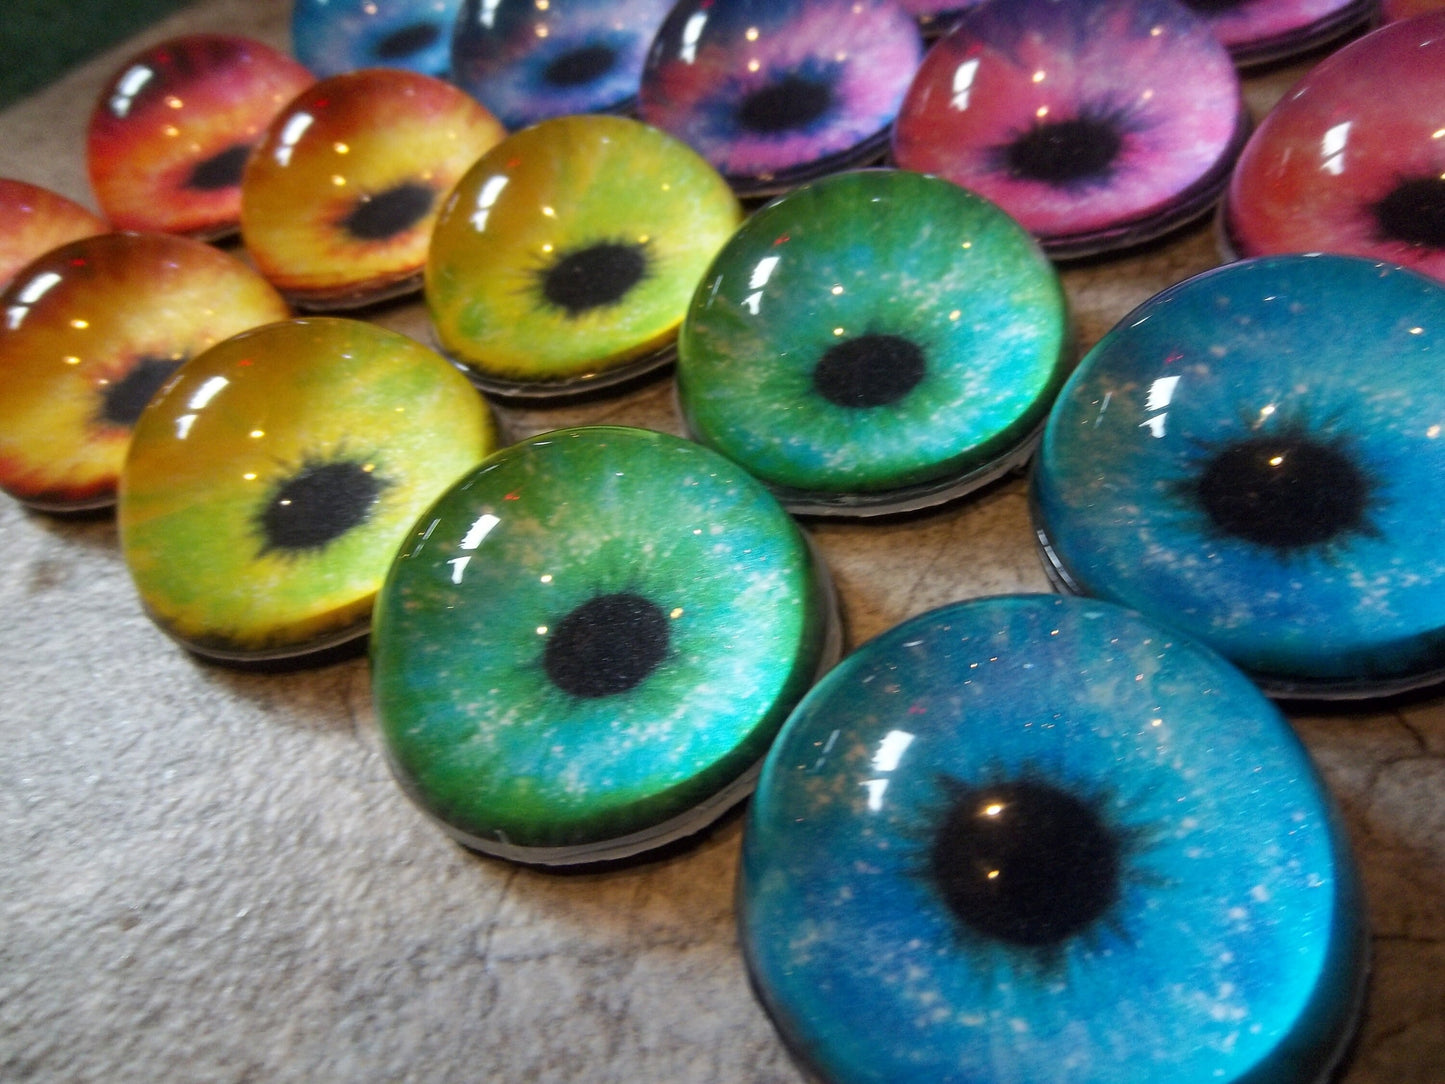 PREMADE - Costume / Fursuit Eyes - Custom - 1.5" - Acrylic 3-D Follow Me Affect Eyes - Can make any design!  - Galaxy Round